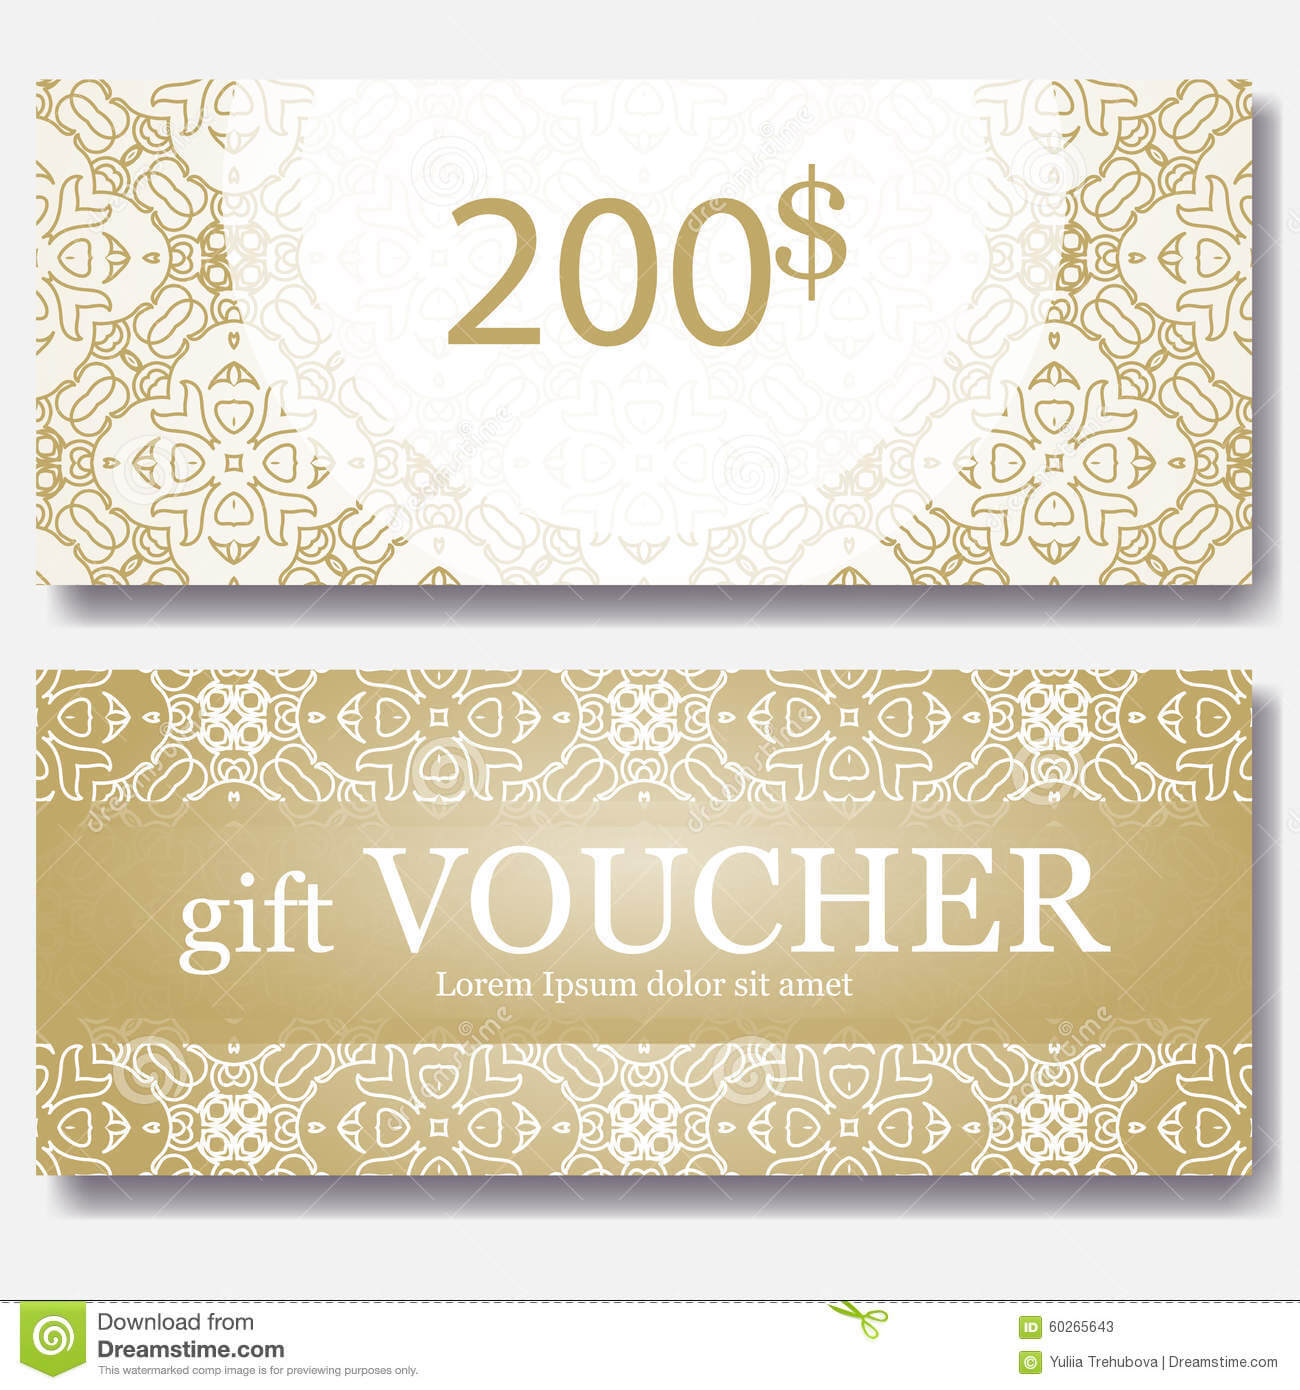 Gift Voucher Template With Mandala. Design Certificate For Within Yoga Gift Certificate Template Free